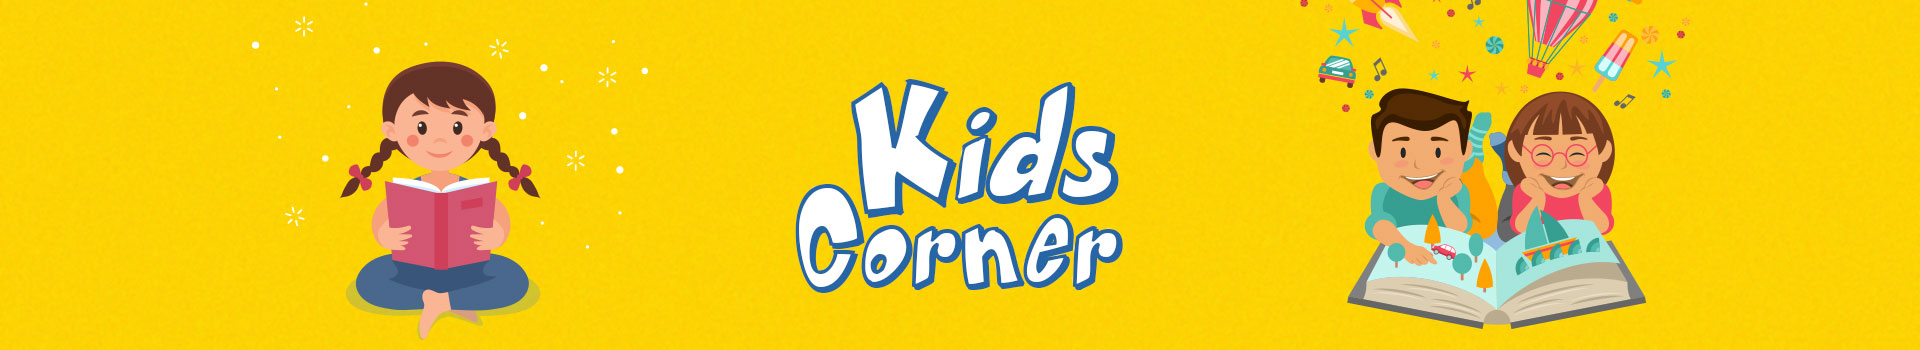 Kid's Corner at Atchison Public Library